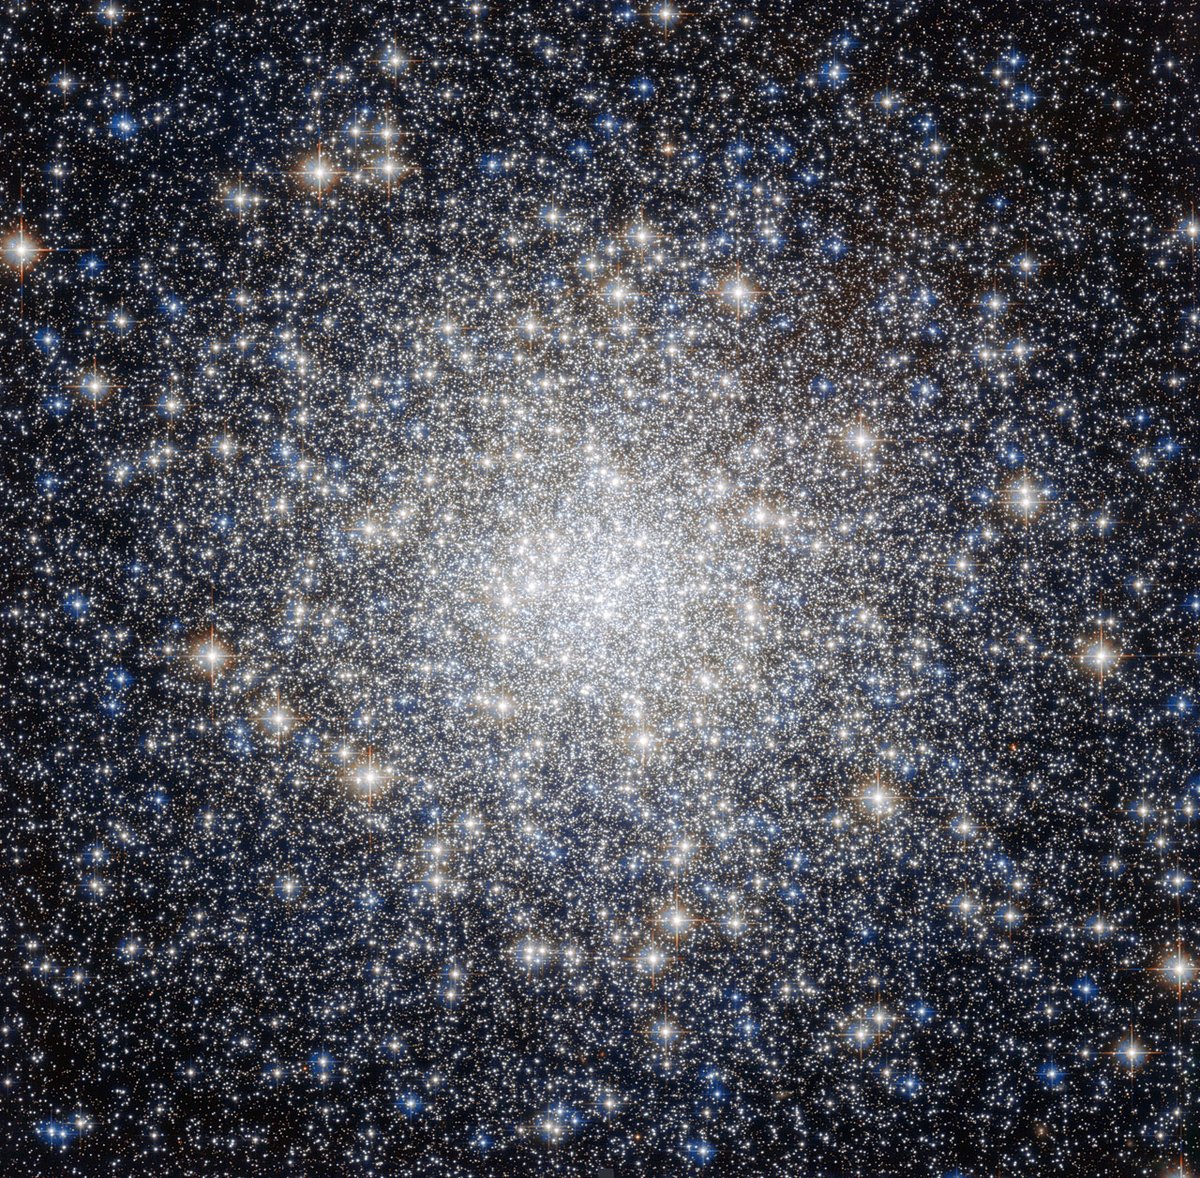 Messier 92 is an ancient globular cluster in the constellation Hercules. Stunning, though often overlooked because of nearby M13.Credit: ESA/Hubble, NASA Acknowledgement: Gilles Chapdelaine